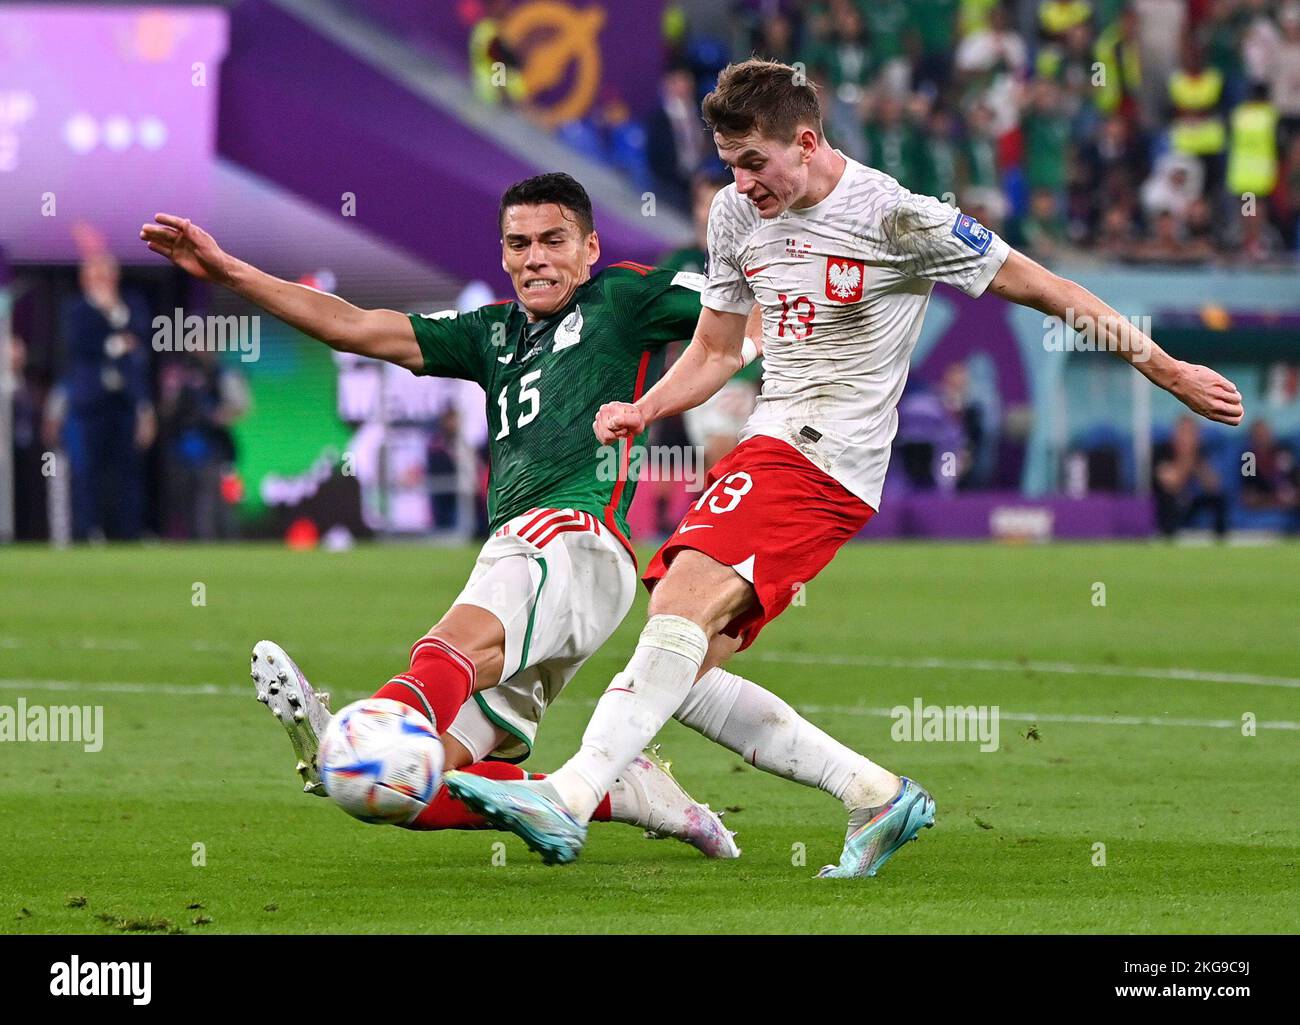 Doha, Qatar. 22nd Nov, 2022. Hector Moreno (L) of Mexico vies with Jakub Kaminski of Poland during the Group C match between Mexico and Poland of the 2022 FIFA World Cup at Ras Abu Aboud (974) Stadium in Doha, Qatar, Nov. 22, 2022. Credit: Chen Cheng/Xinhua/Alamy Live News Stock Photo